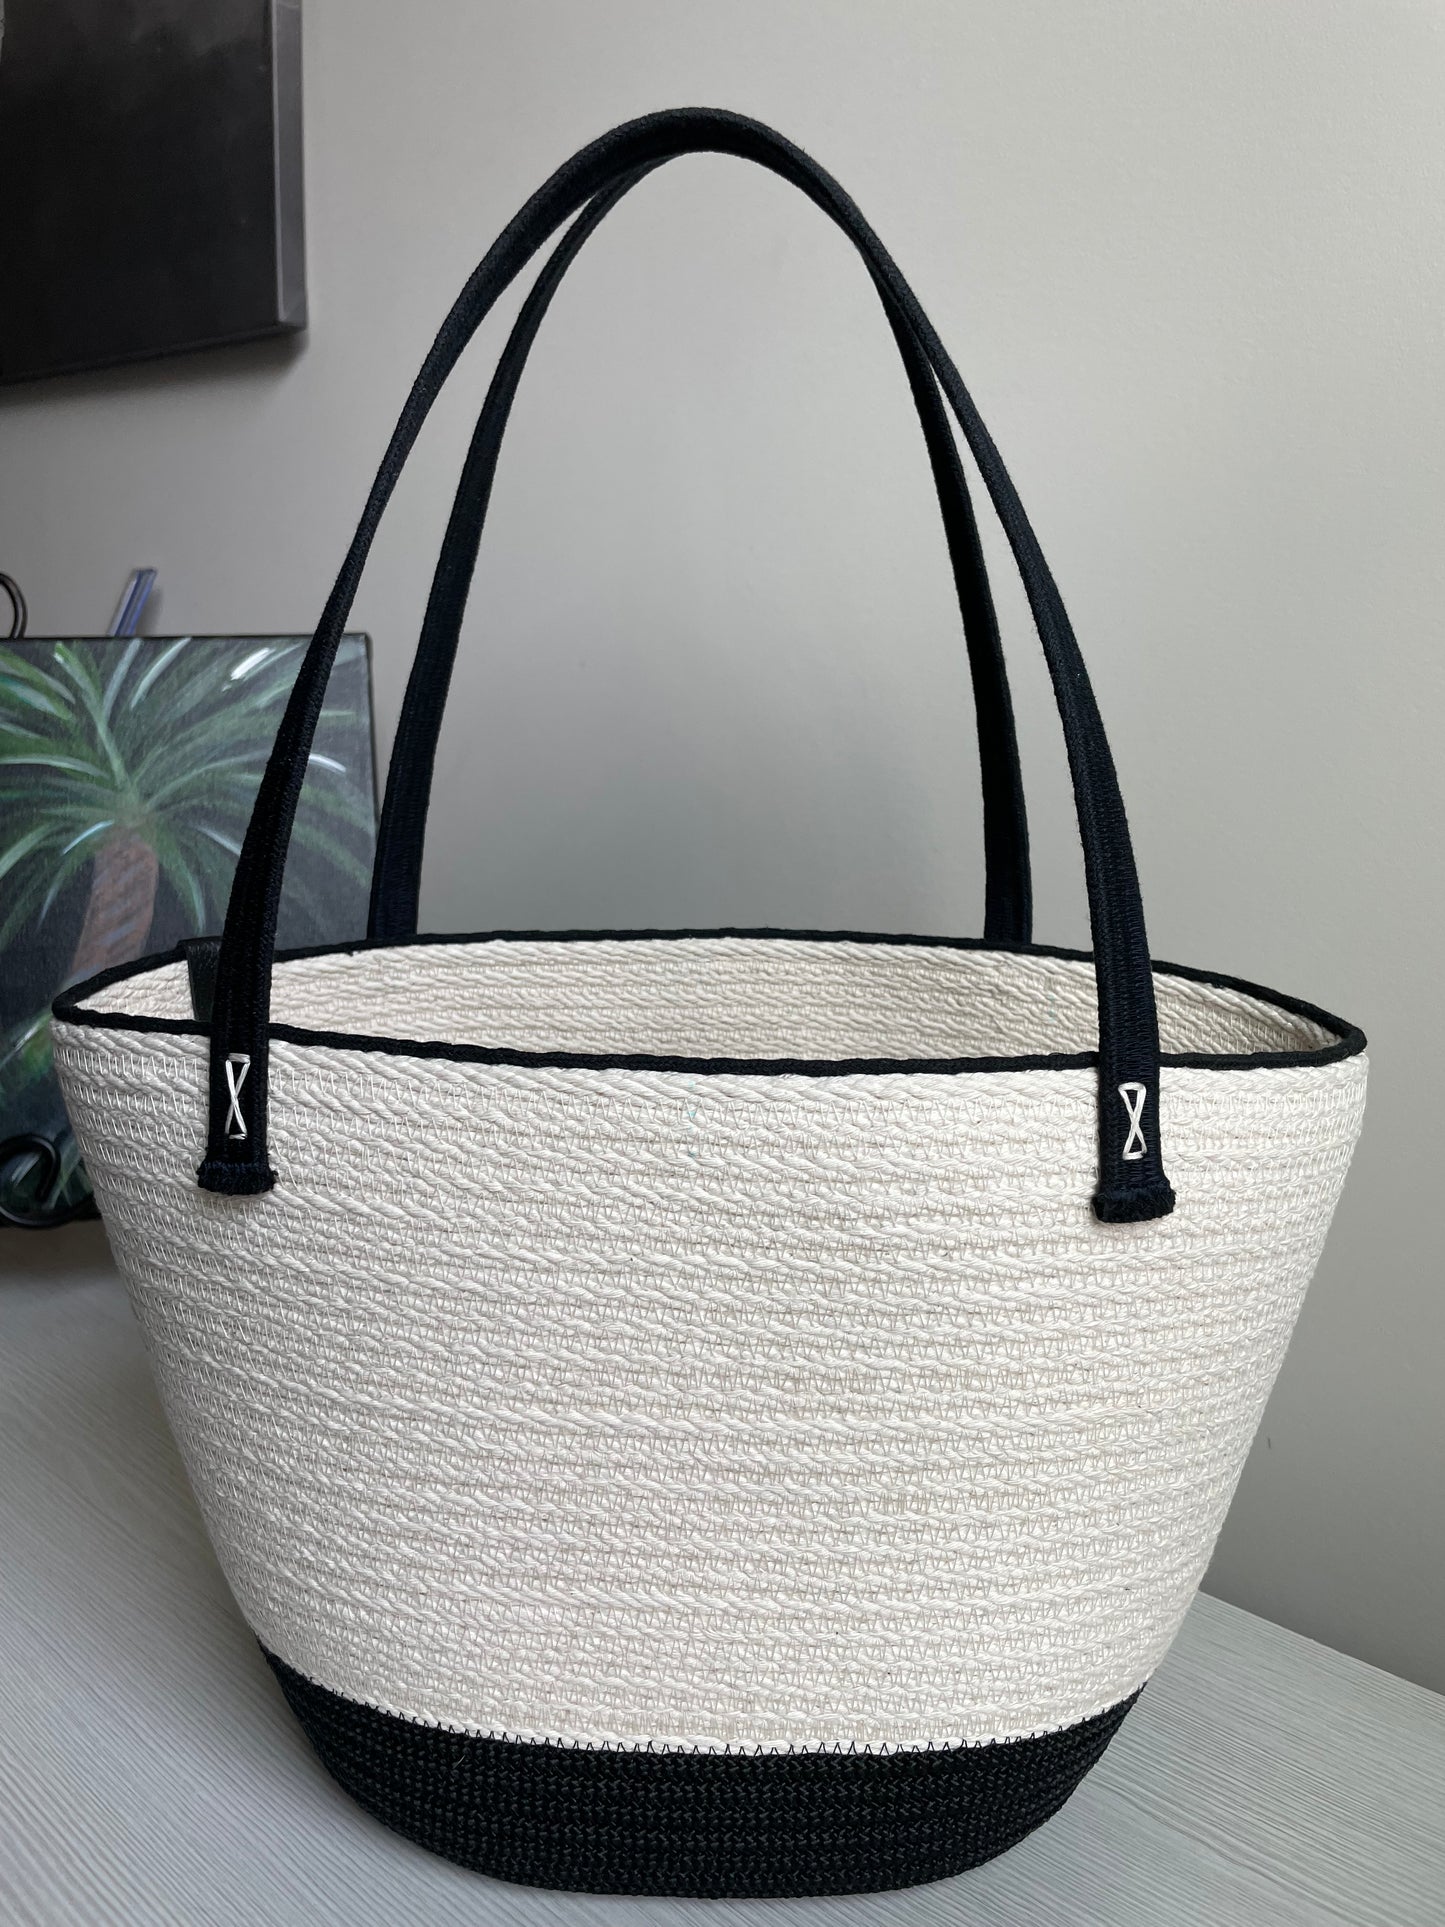 Handmade Cotton Rope Market Tote Black and Netural